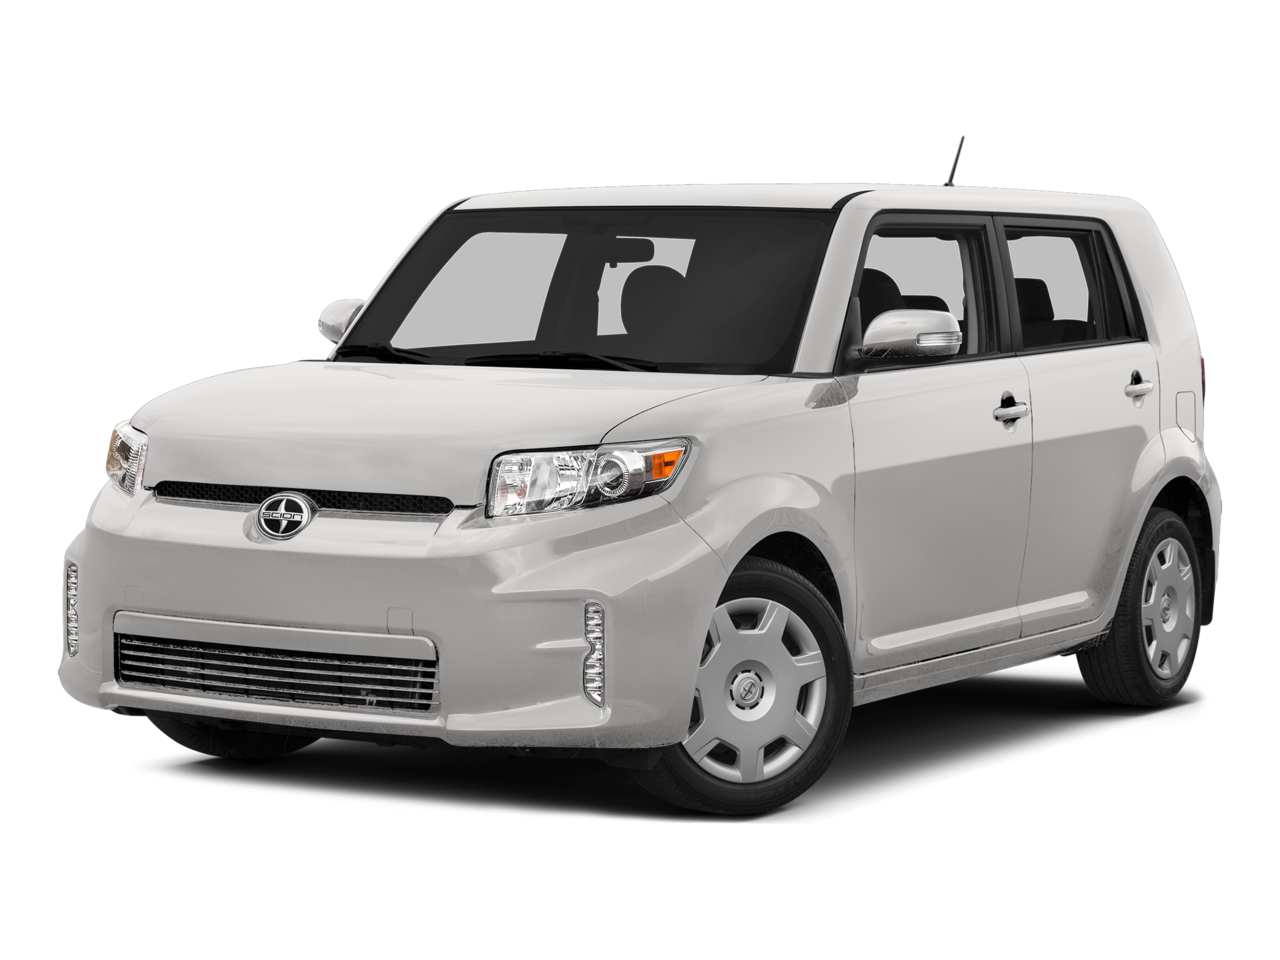 2015 Scion xB Repair: Service and Maintenance Cost